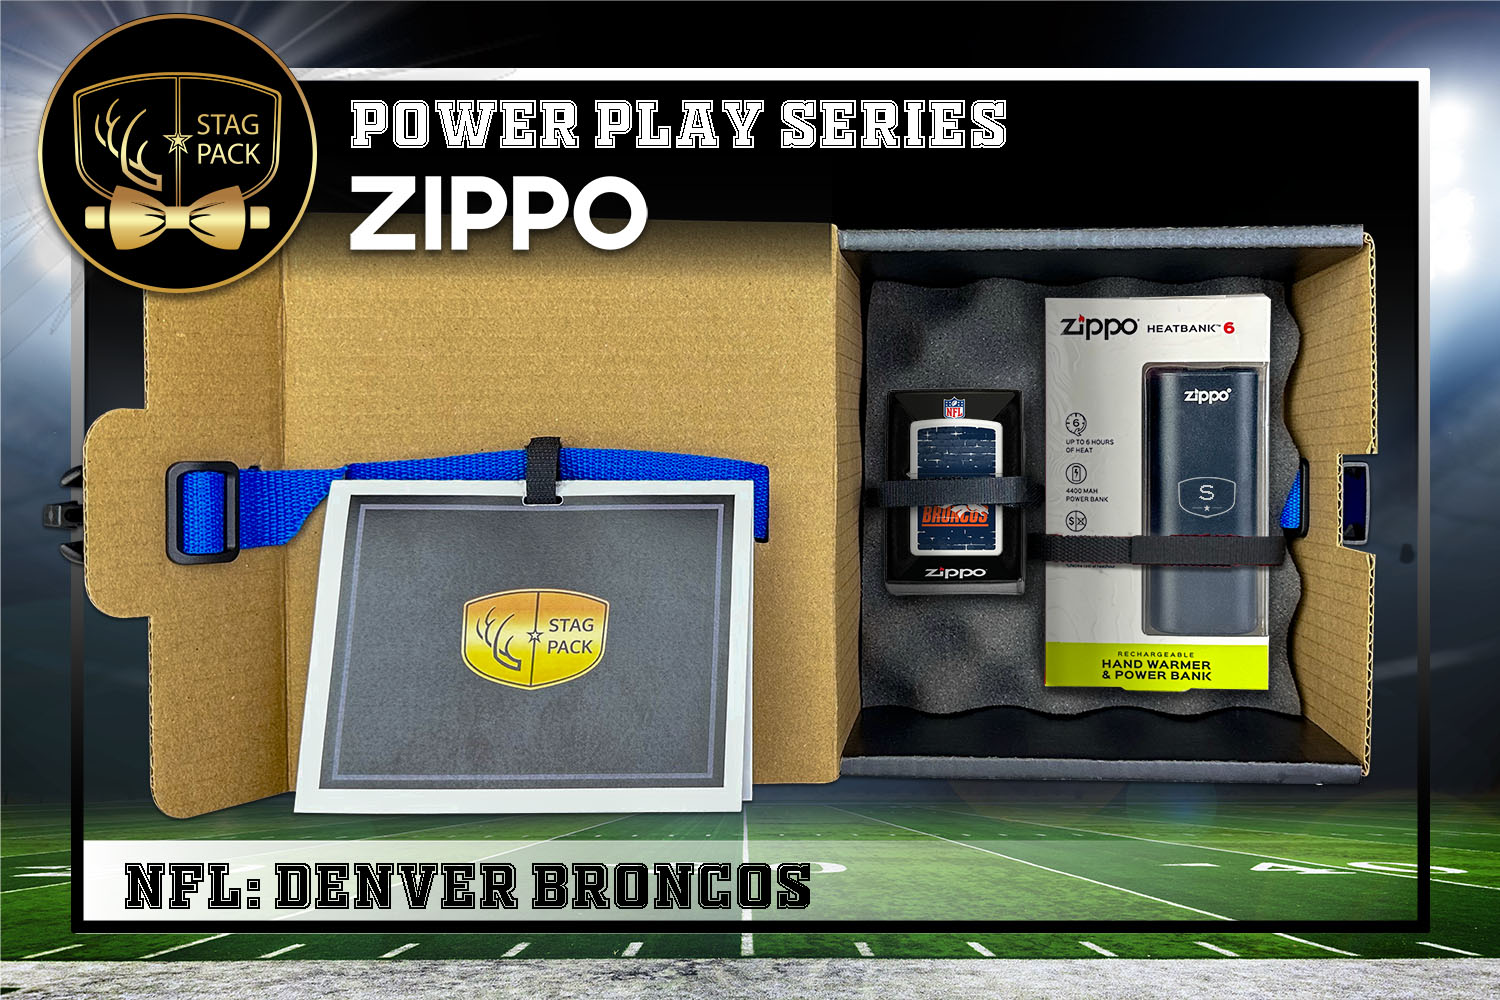 Custom Engraved Groomsmen Gift with NFL Zippo Windproof lighter & Heatbank in a Personalized Gift Box with a Message Card.